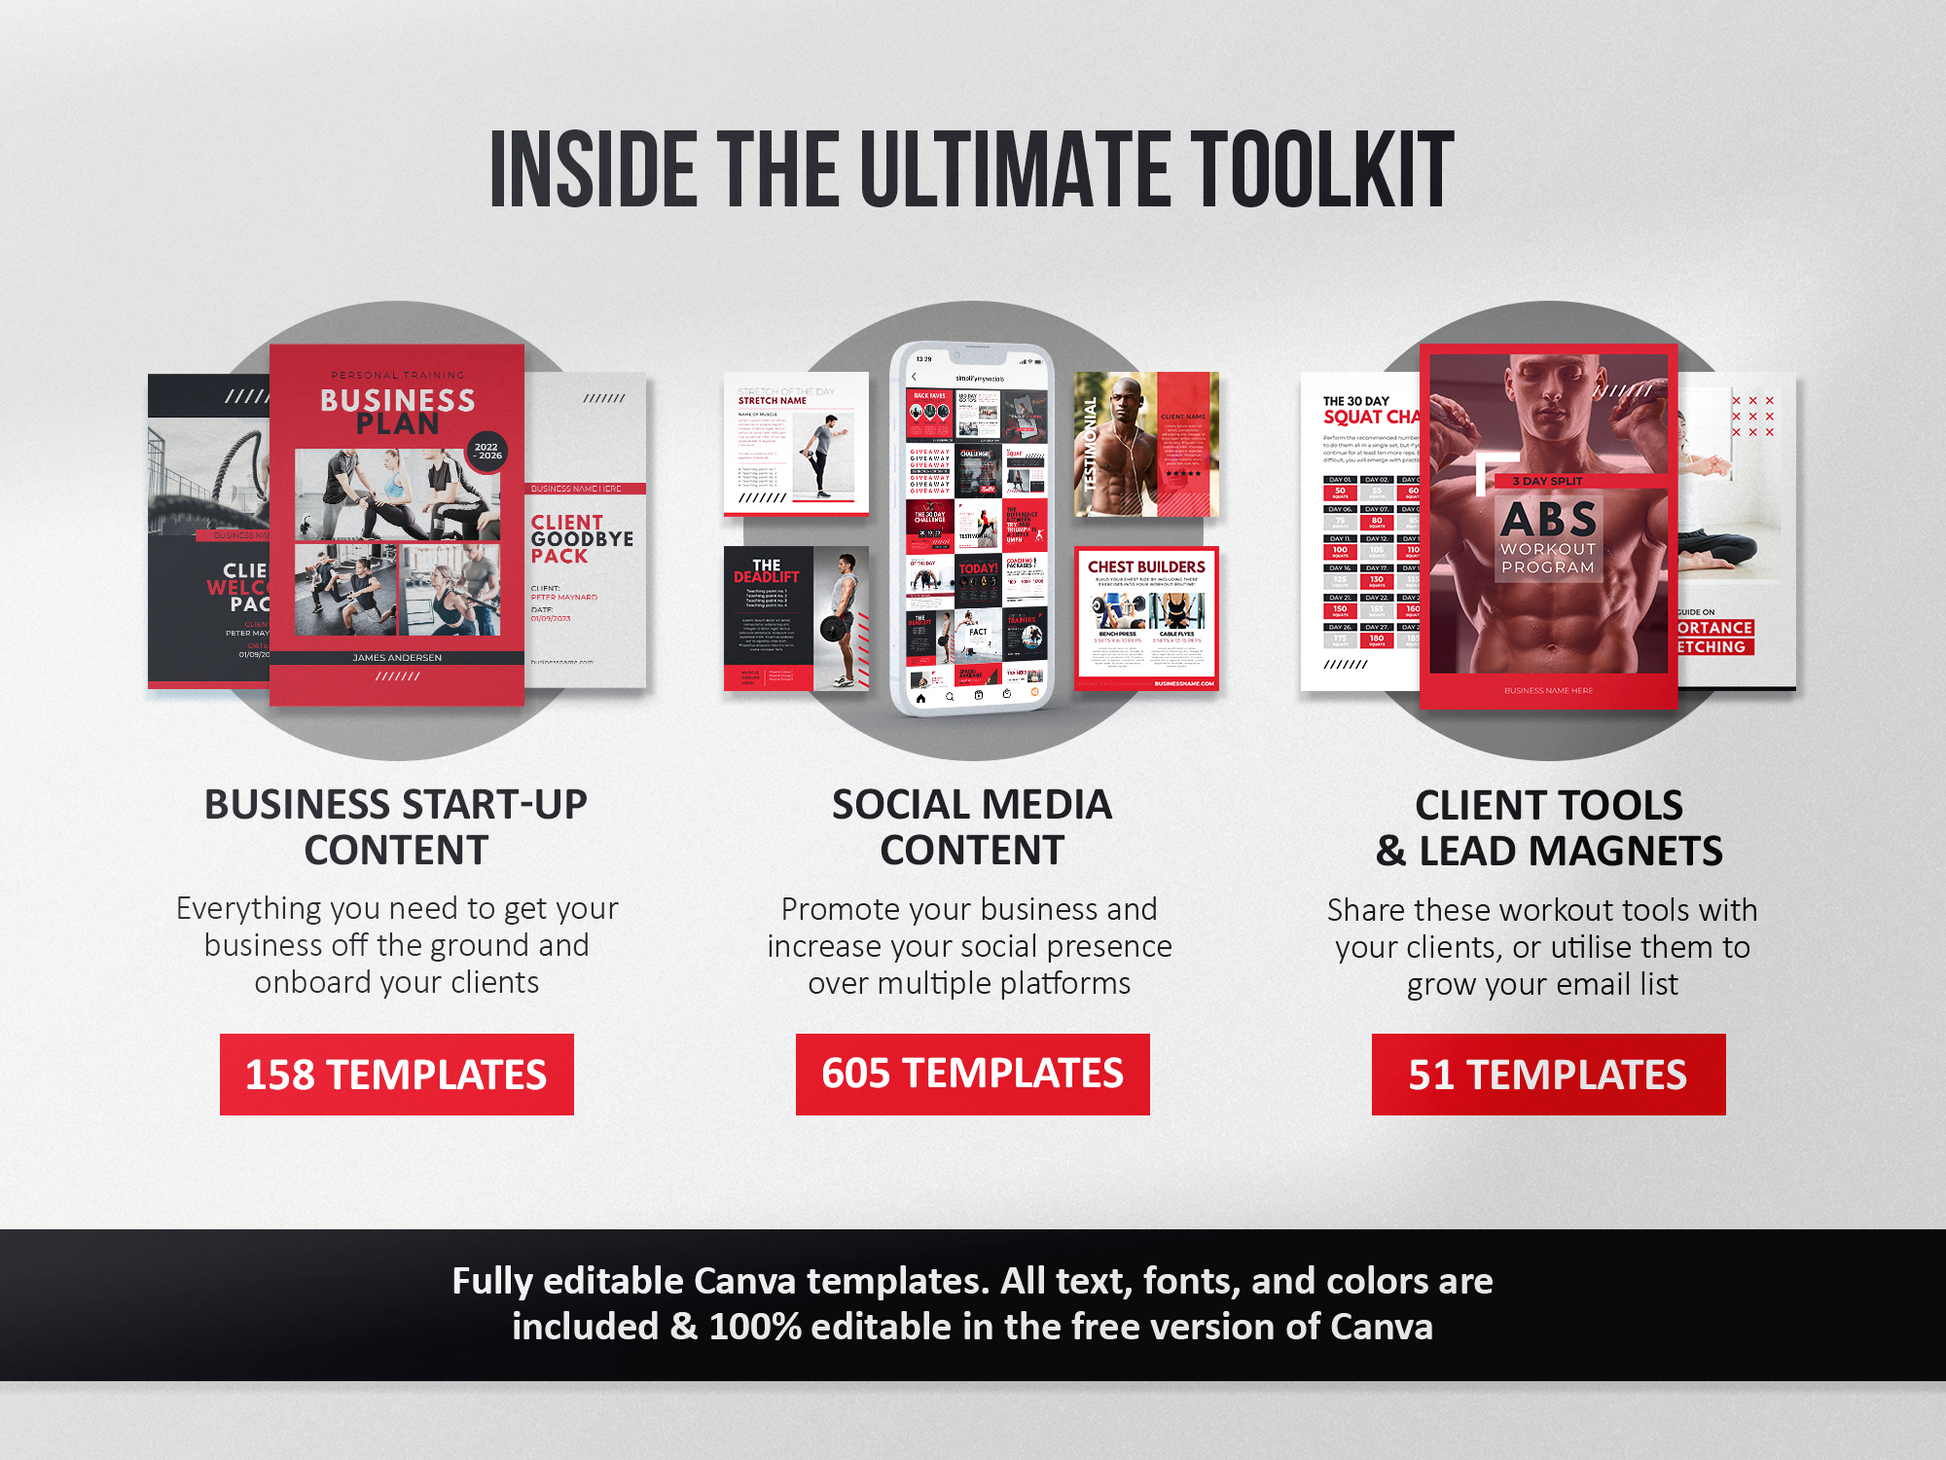 Fitness Ultimate Toolkit (Scarlet)